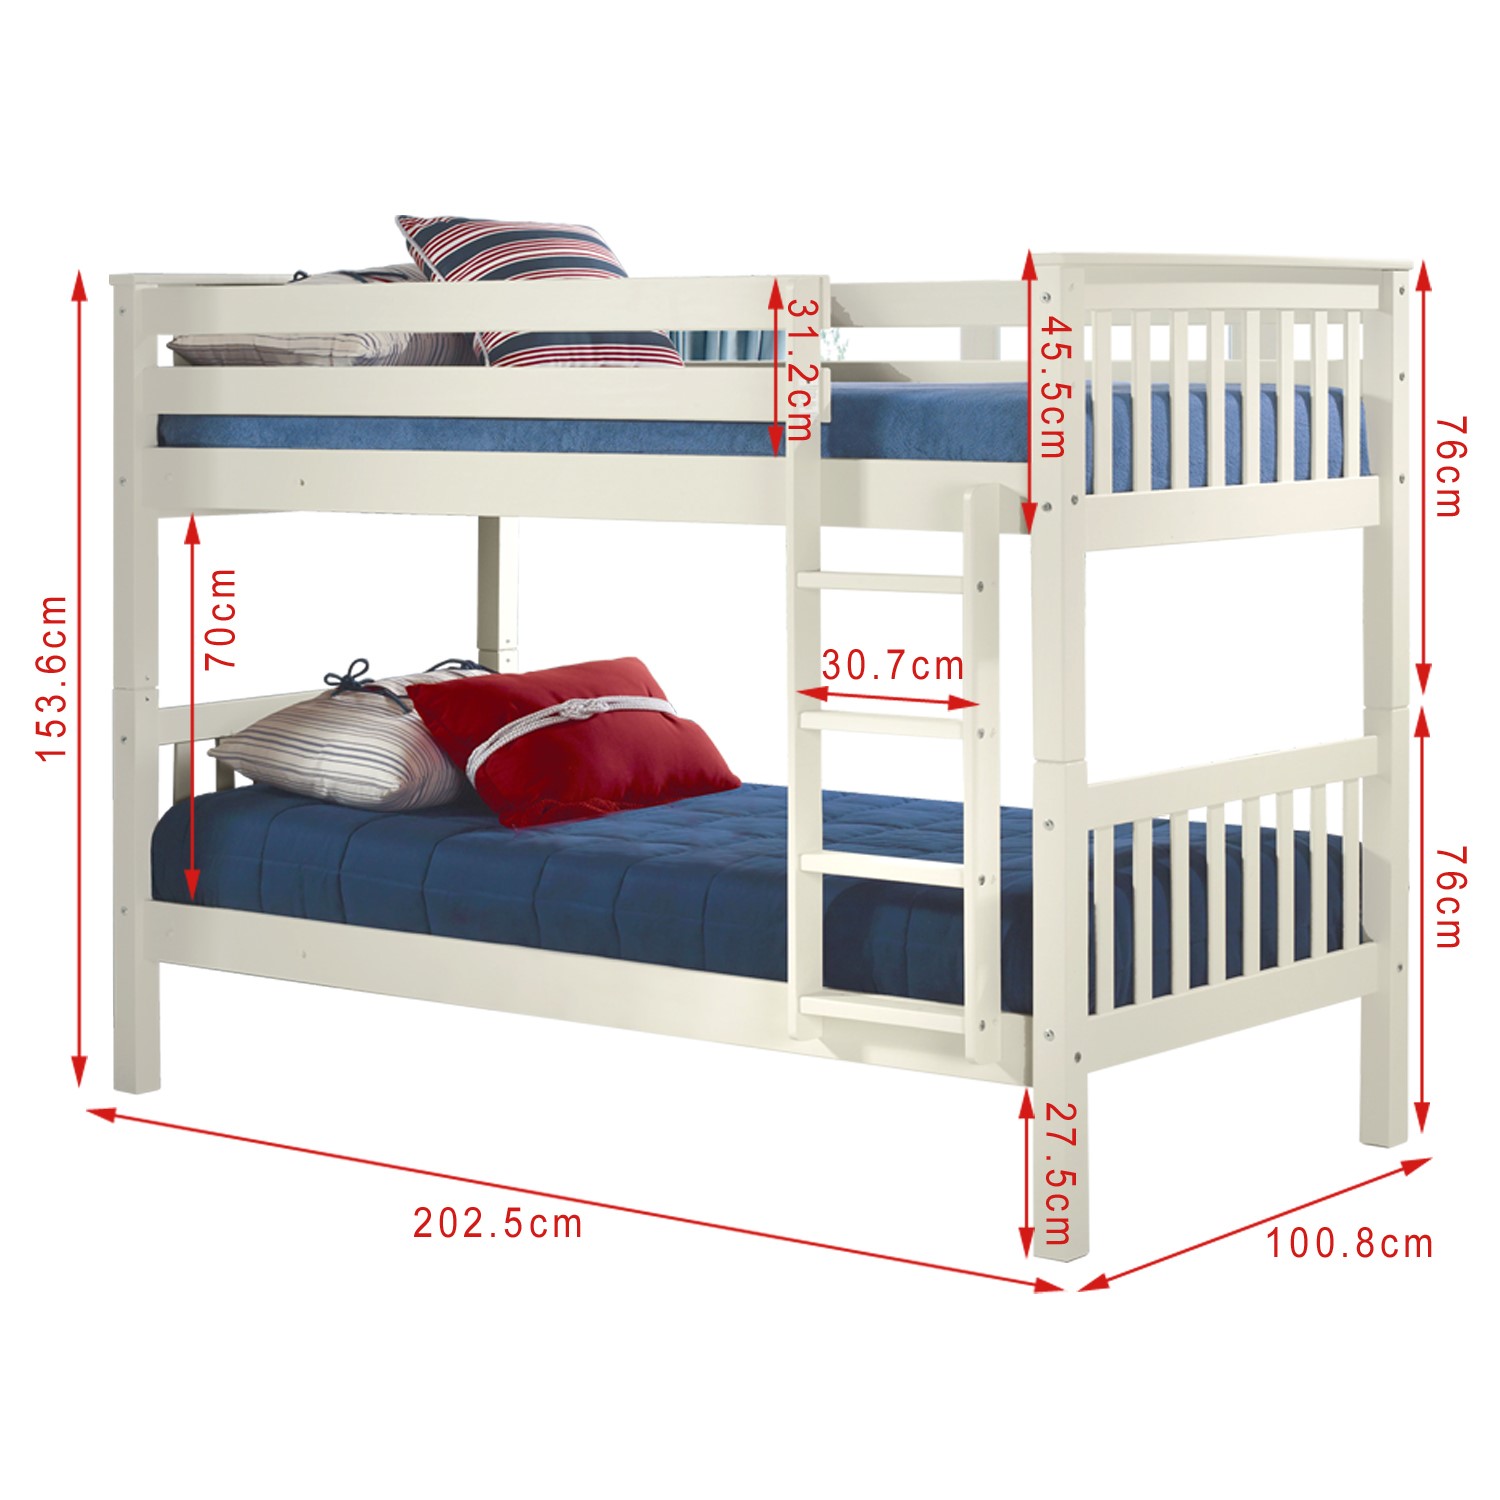 Oxford Single Bunk Bed In White, Bunk Bed Height Dimensions